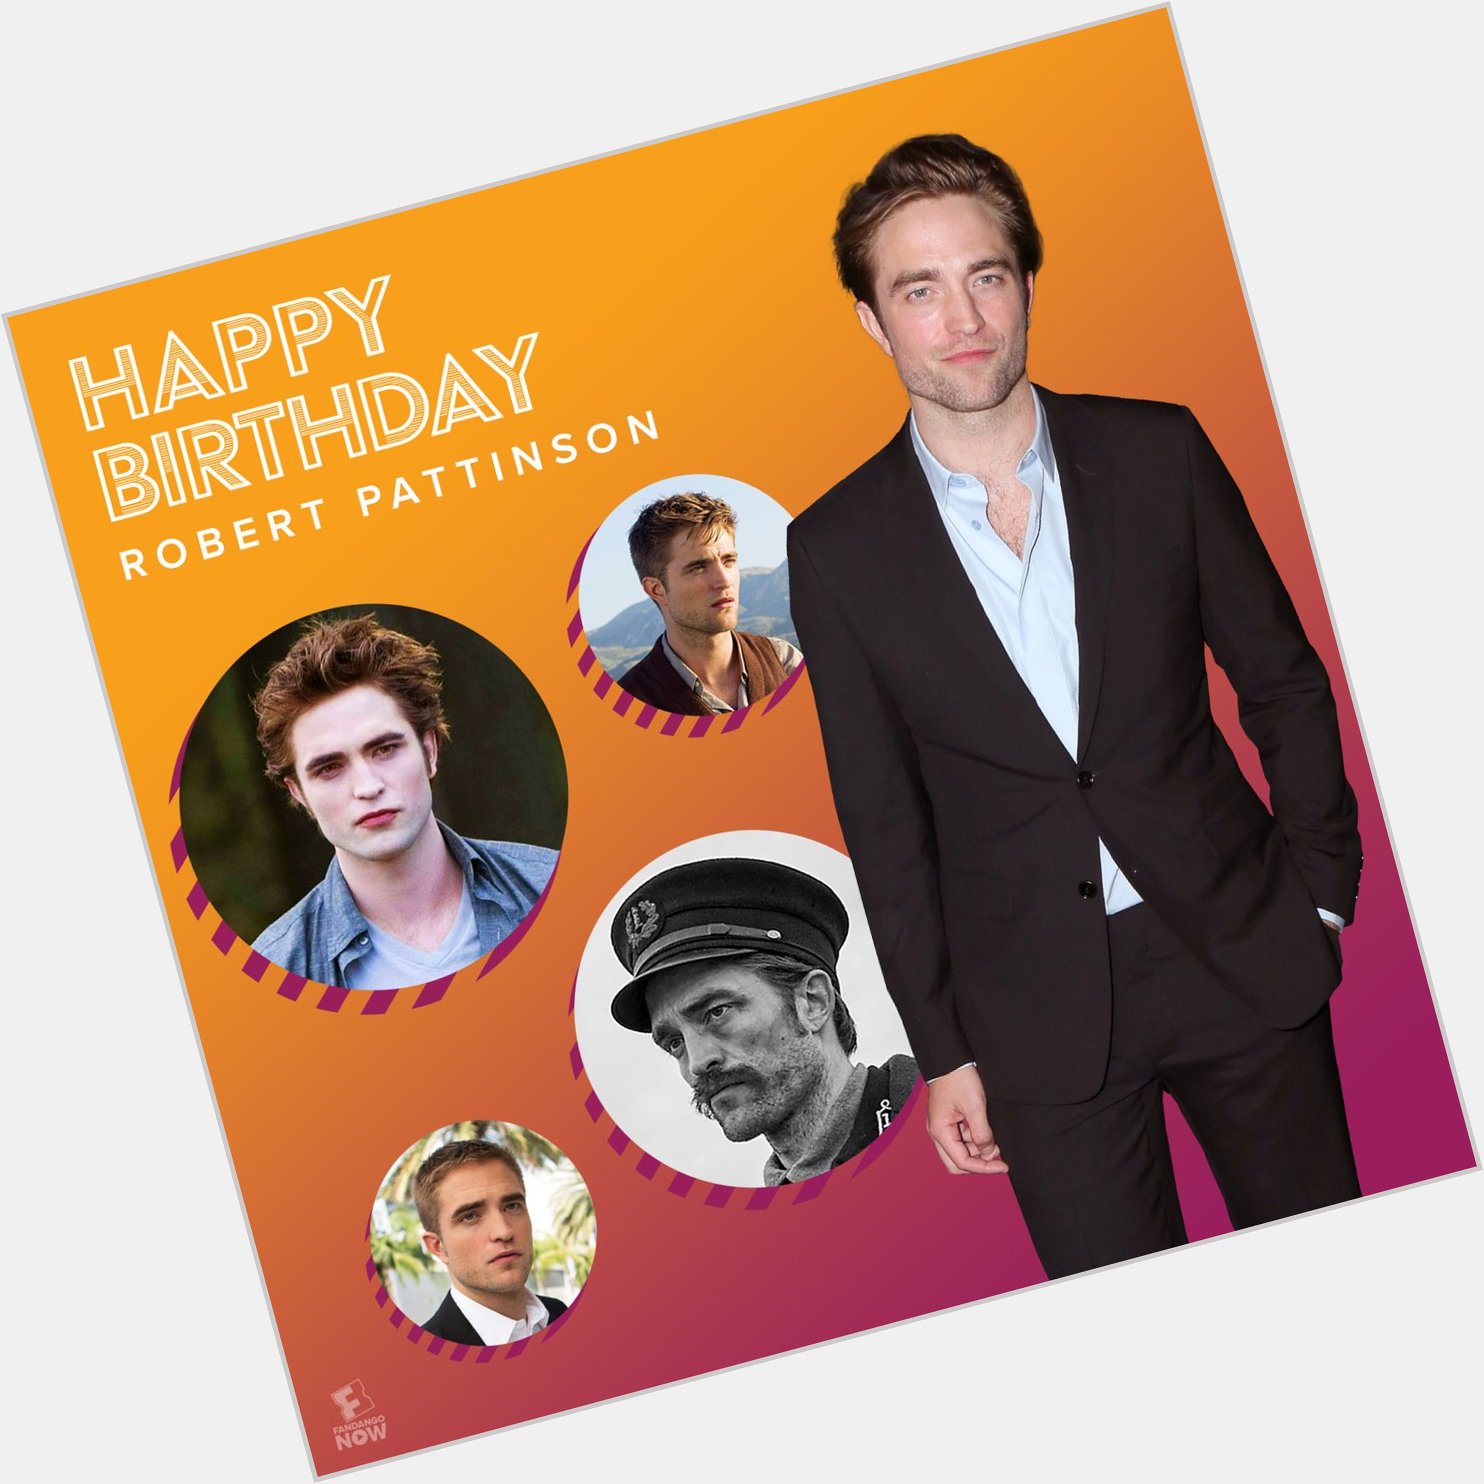 Happy birthday, Robert Pattinson! May have an exceptionally Good Time today... 